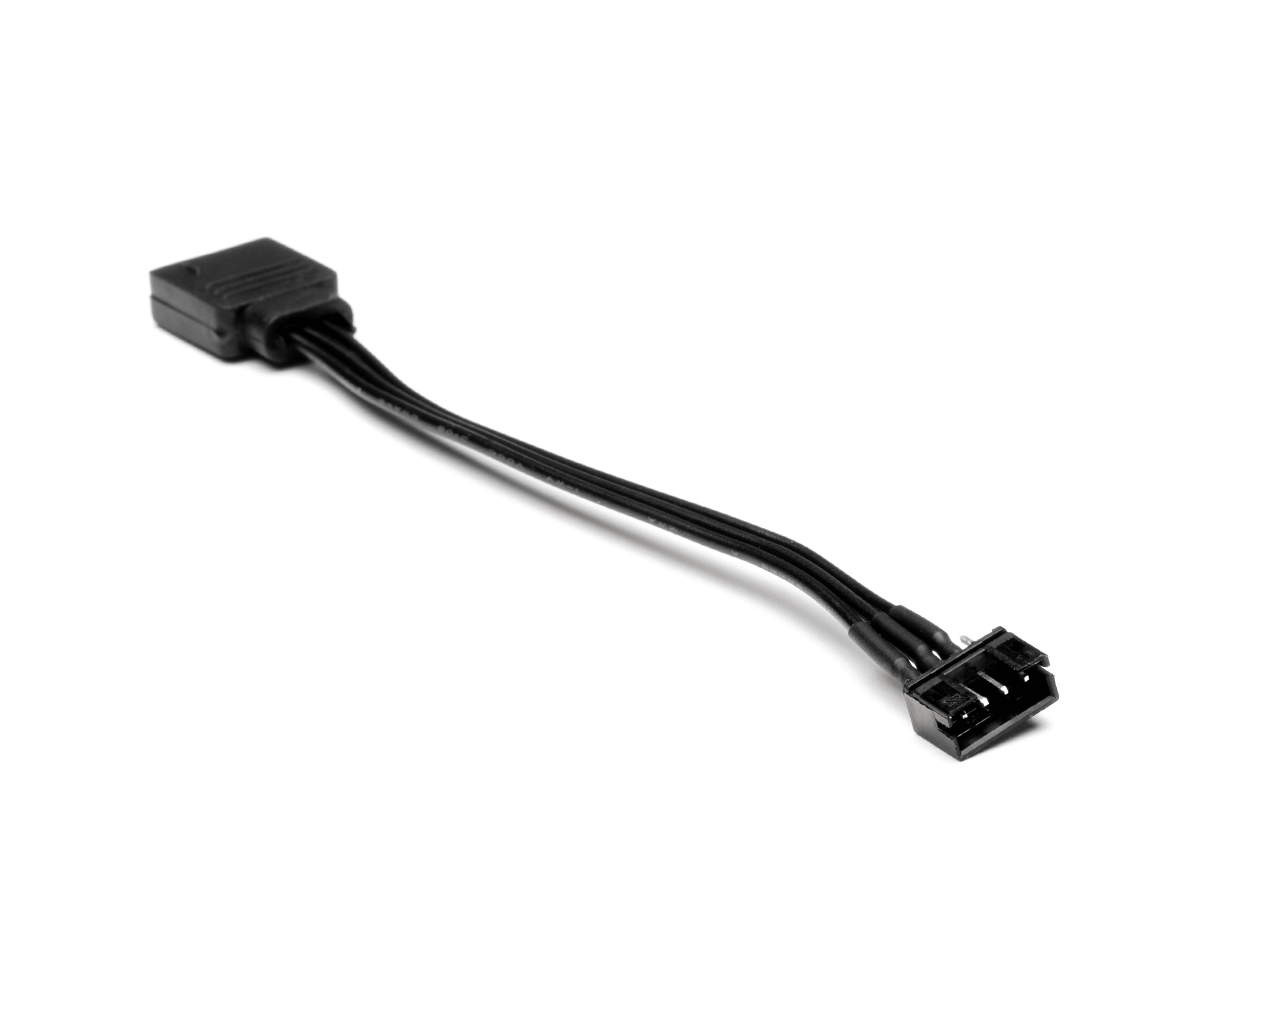 Bykski 5v Addressable RGB (RBW) Adapter Cable - PrimoChill - KEEPING IT COOL